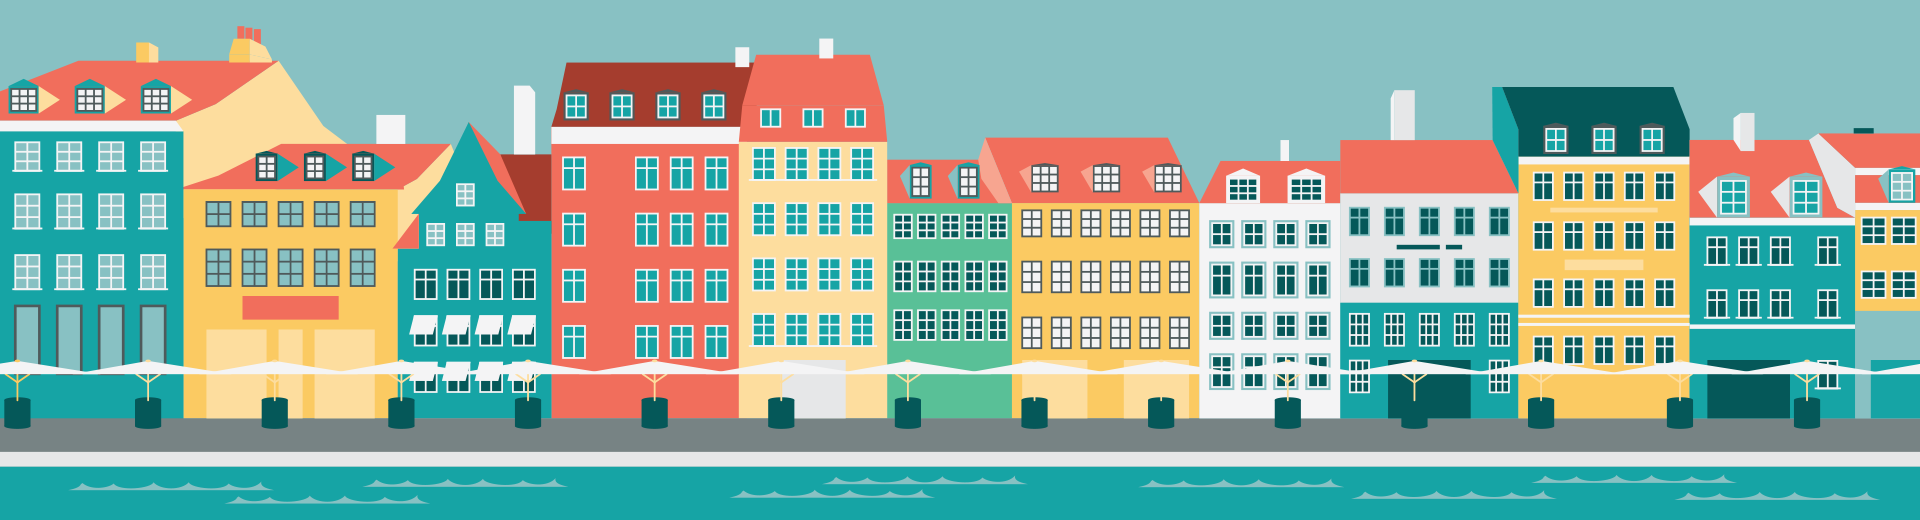 An illustration of the colorful houses on the Copenhagen waterfront